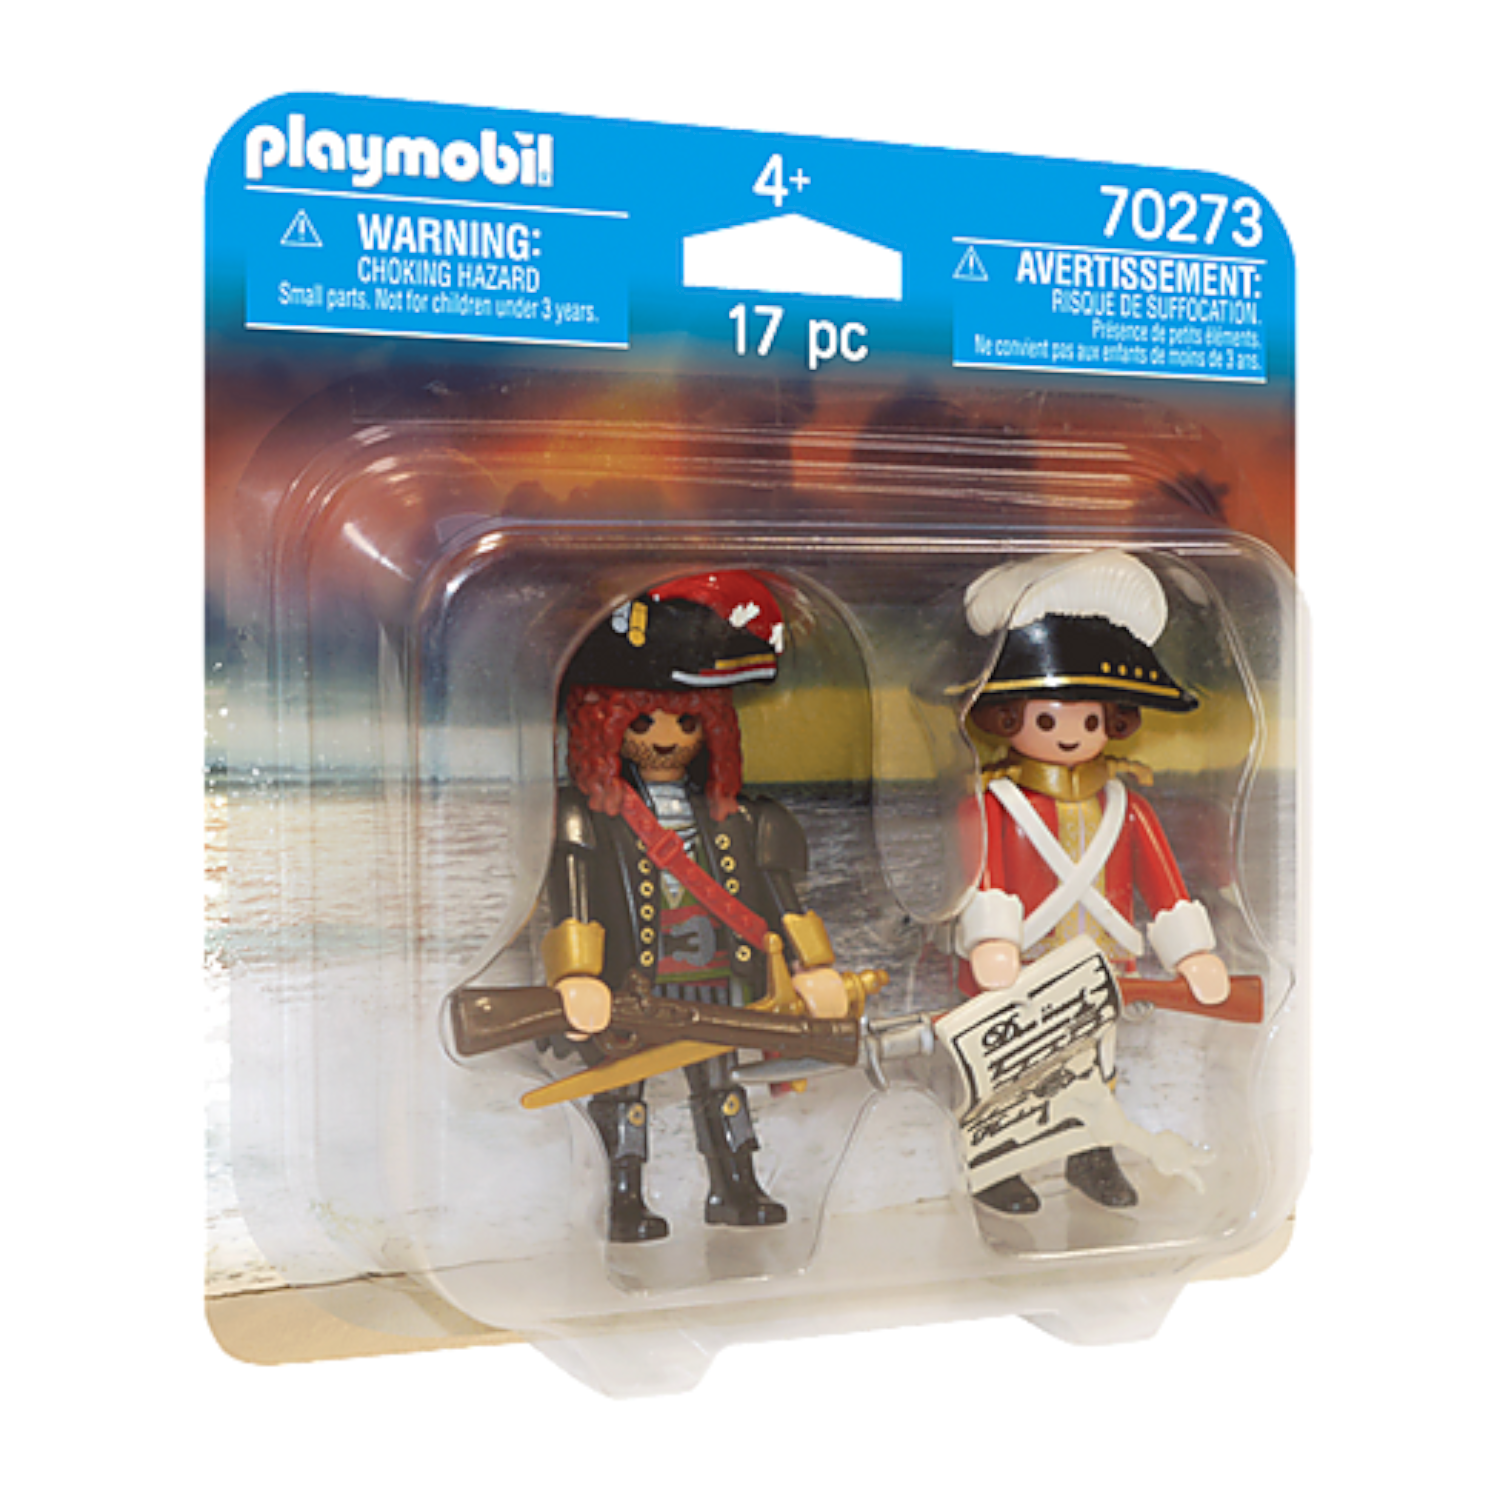 PLAYMOBIL 70273 - Pirate and Redcoat